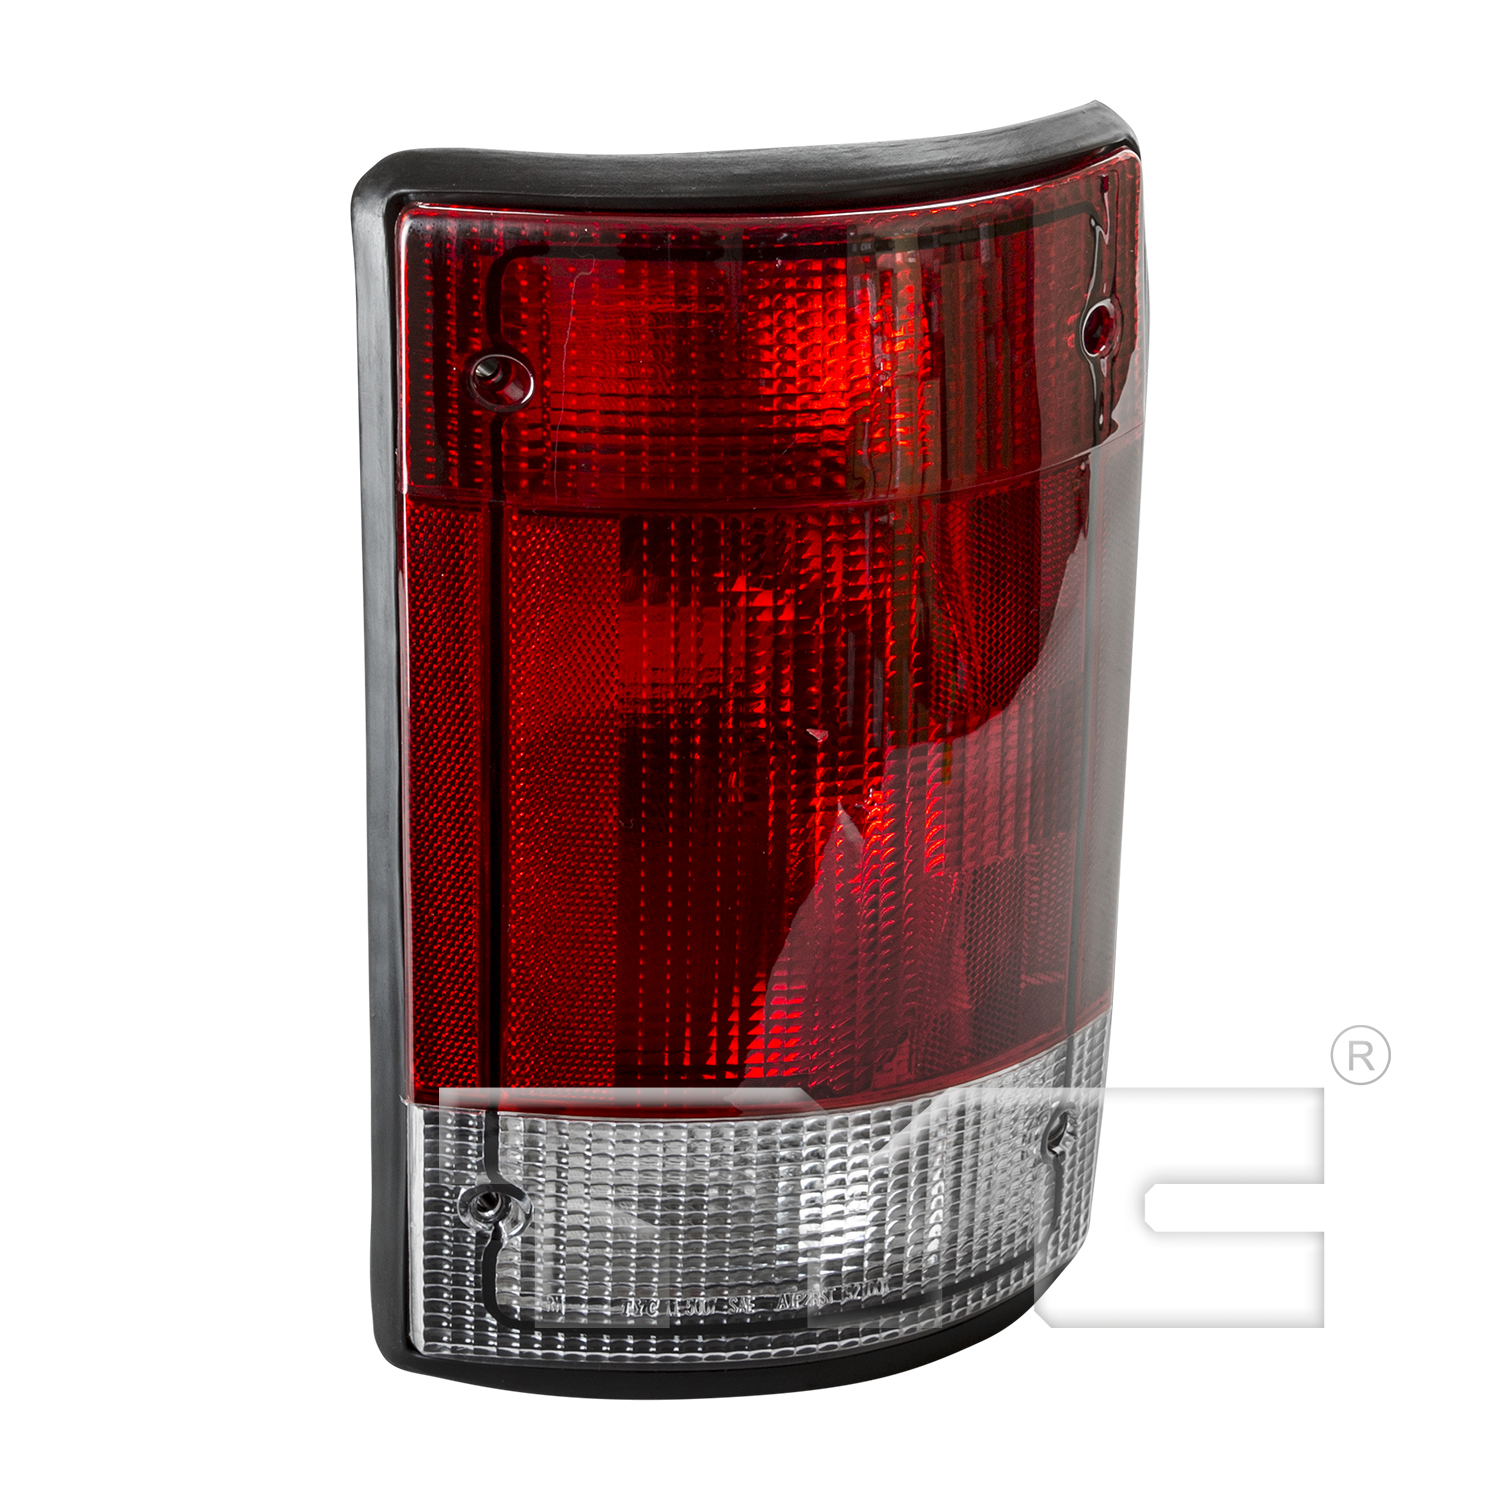 Aftermarket TAILLIGHTS for FORD - E-350 SUPER DUTY, E-350 SUPER DUTY,04-14,RT Taillamp assy